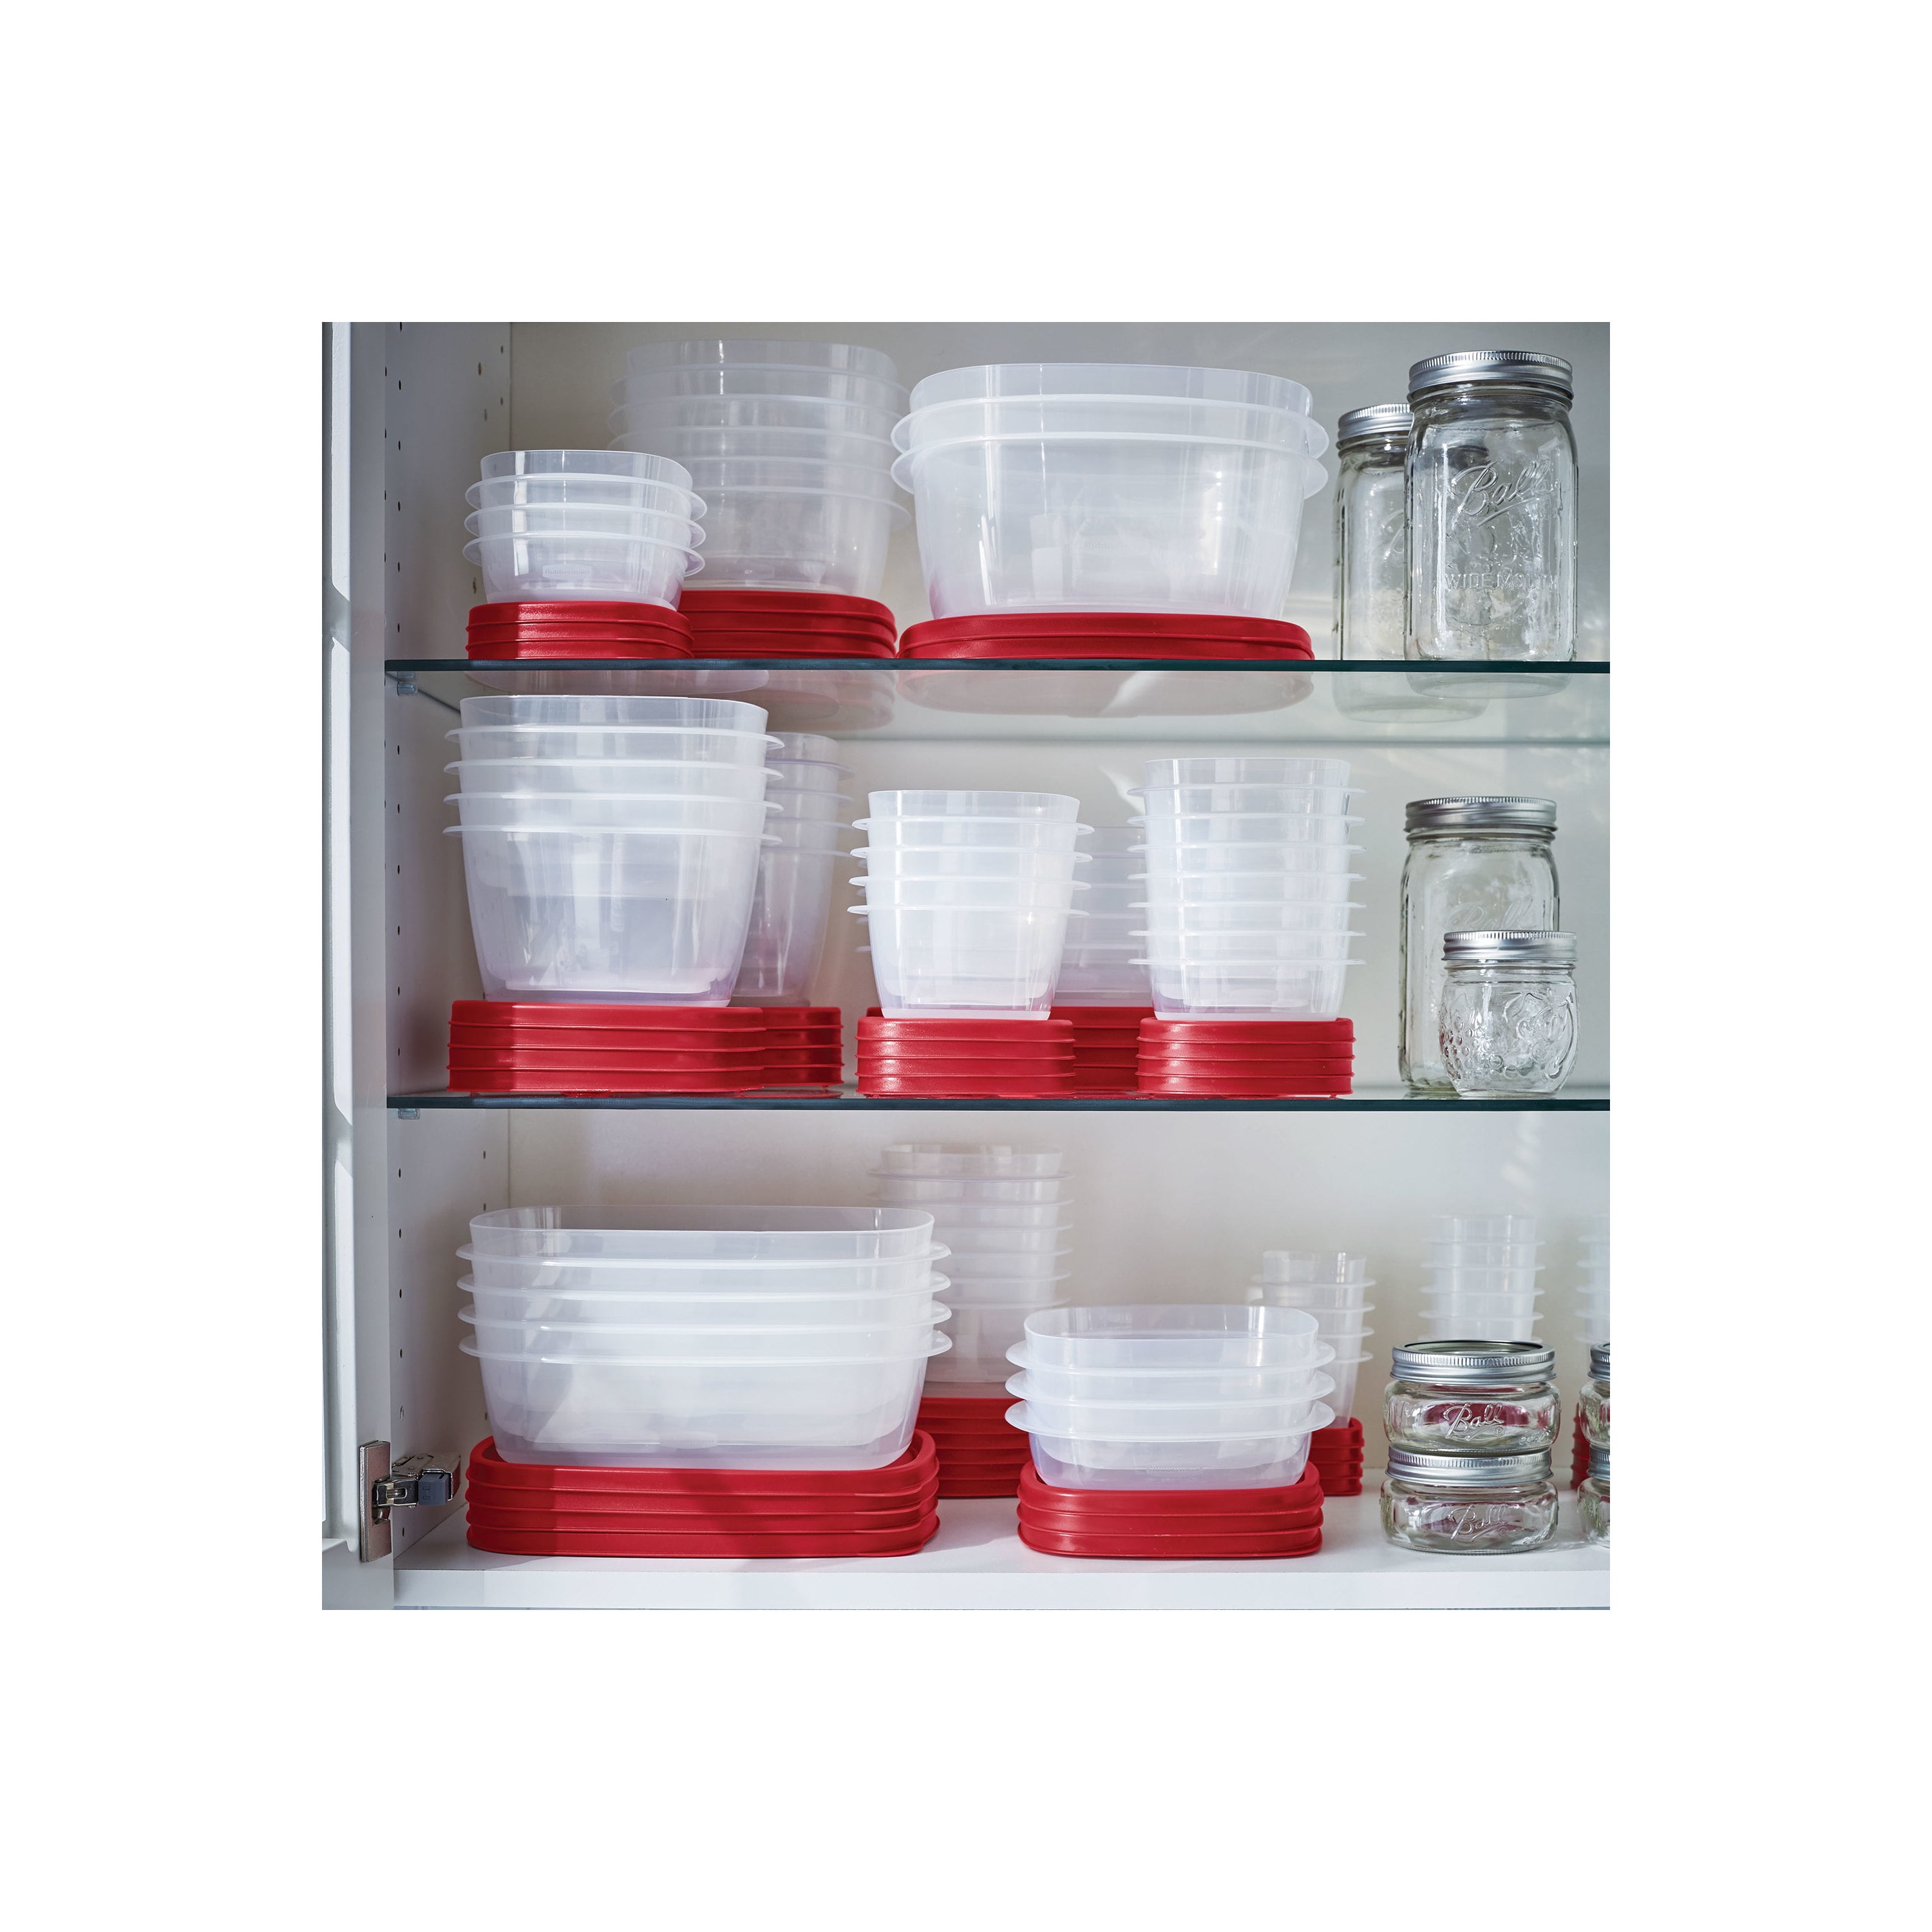 Rubbermaid EasyFindLids 26 Piece Plastic Food Storage Container Set with  Vents, (39.5 Cup), Blue Spruce 